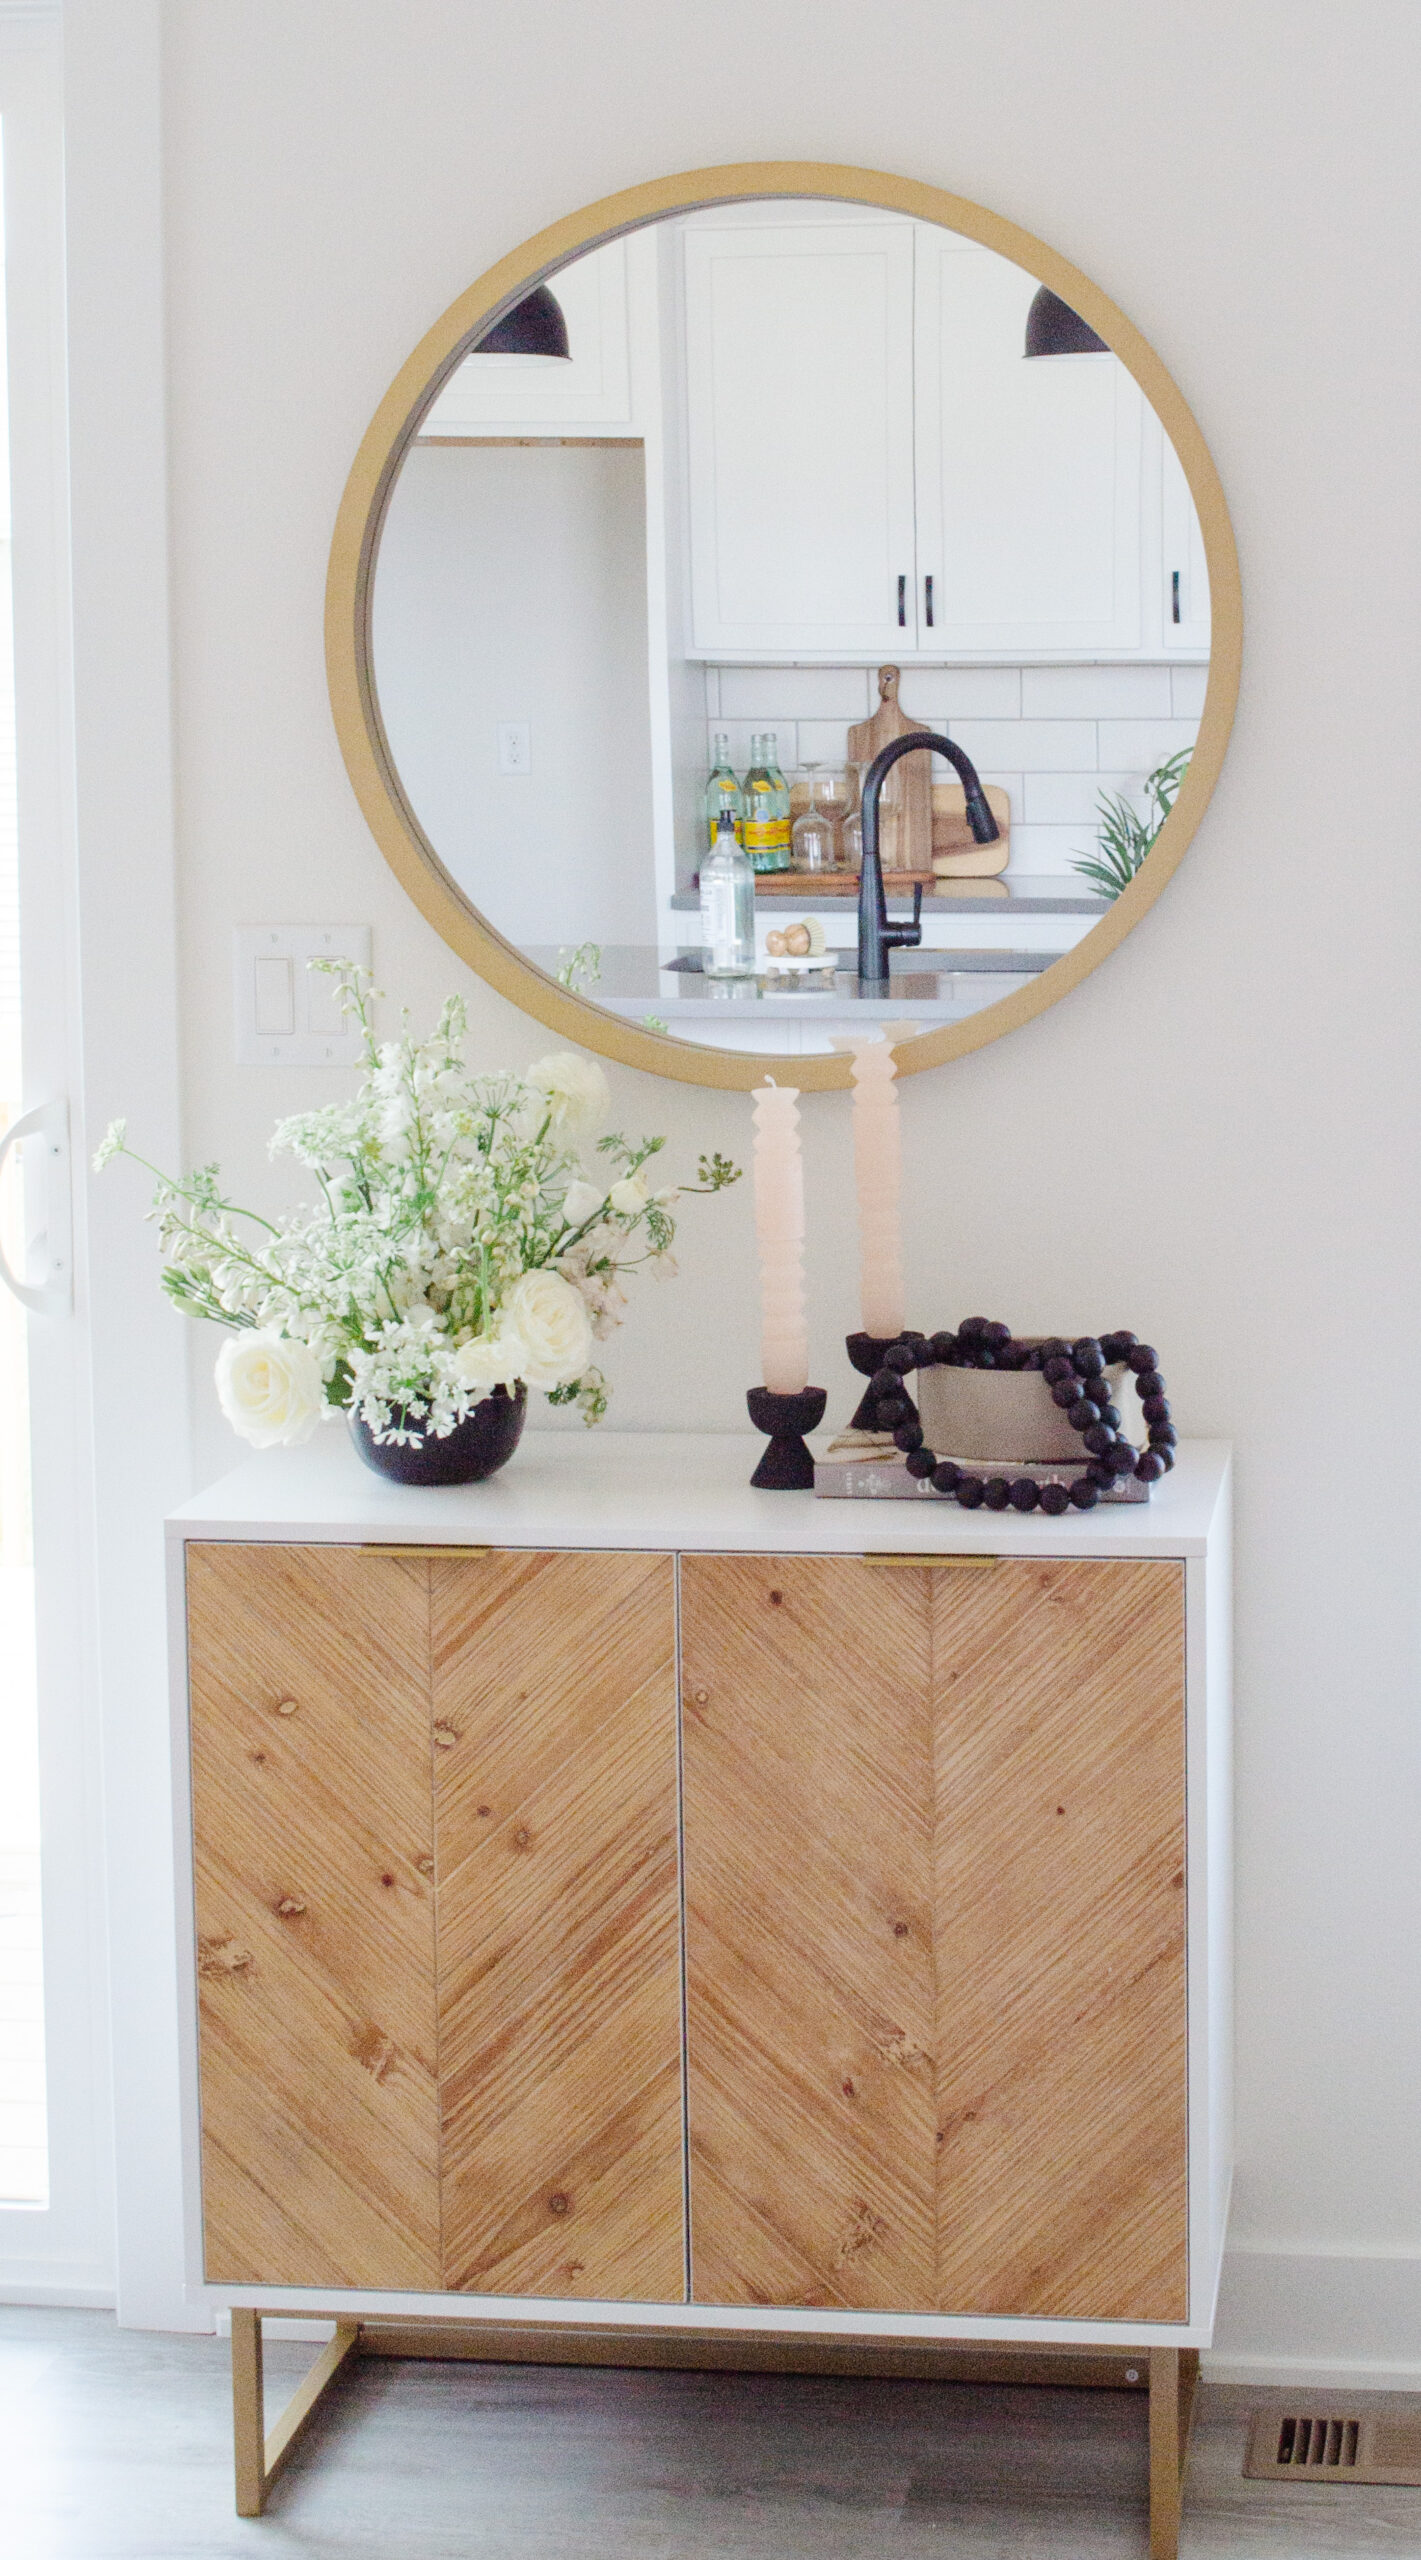 Modern console table with gold mirror and organic decor style.